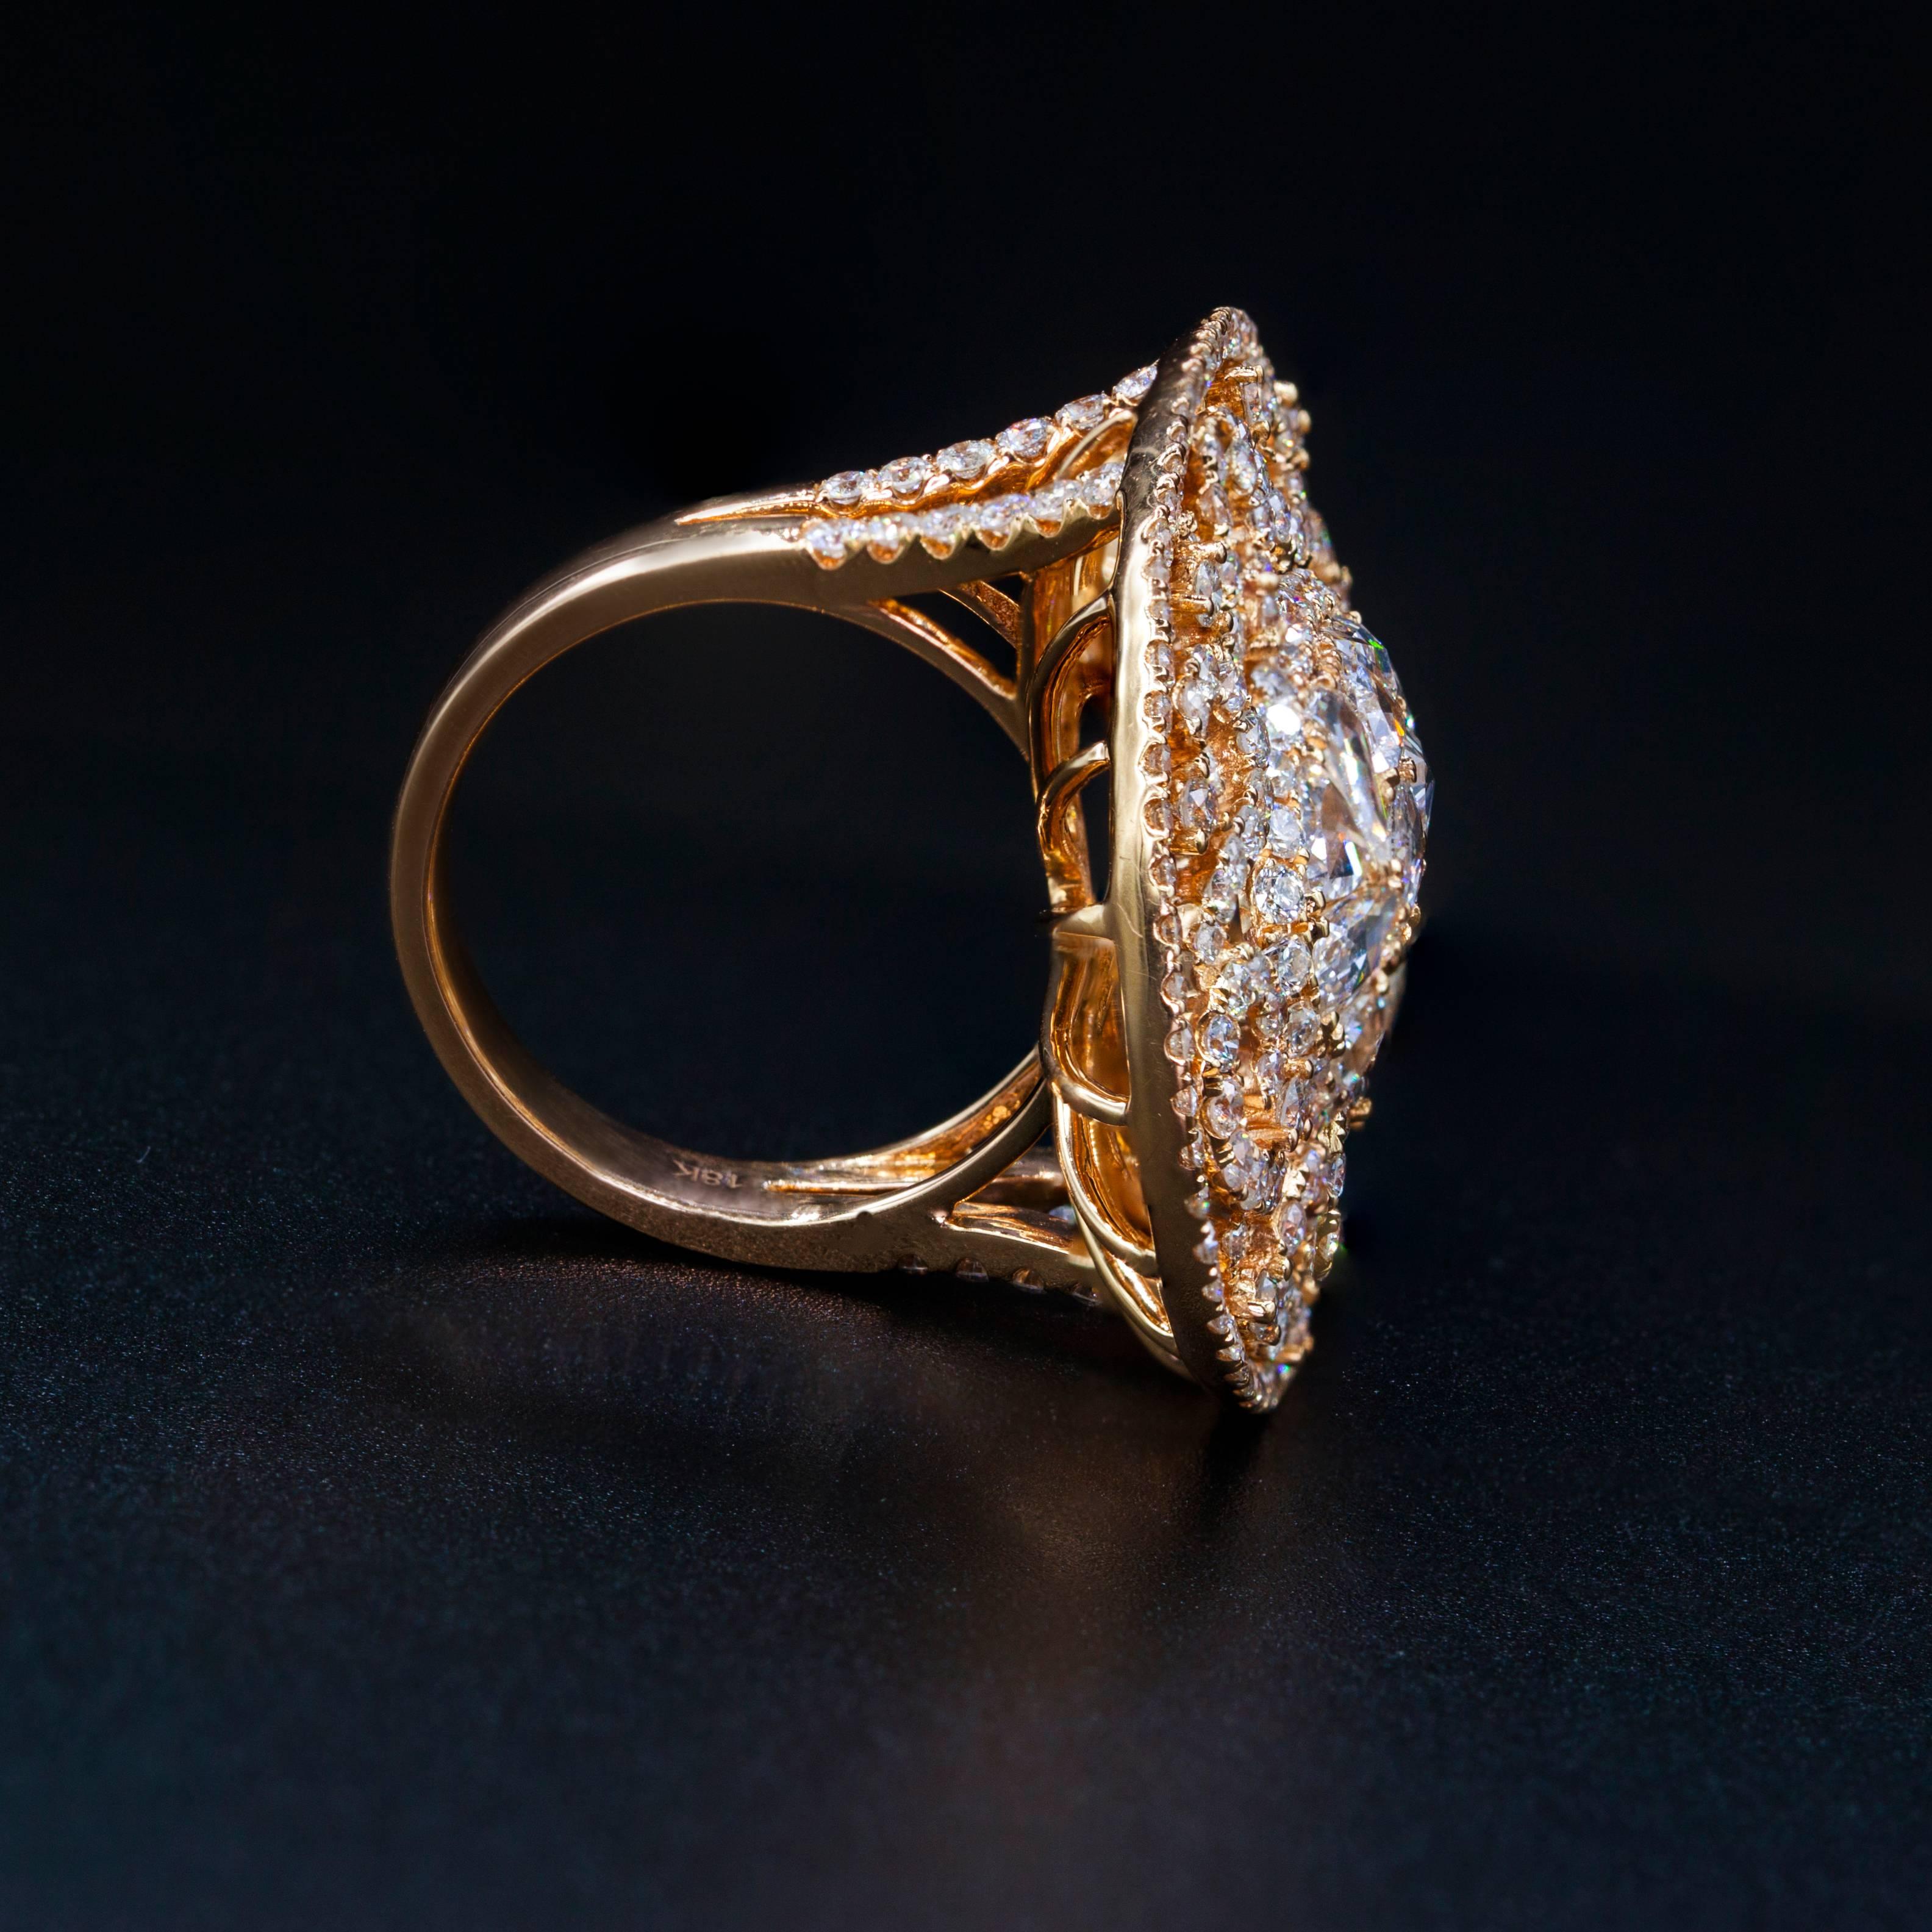 European Cut Diamond Ring in Yellow Gold In New Condition For Sale In New York, NY